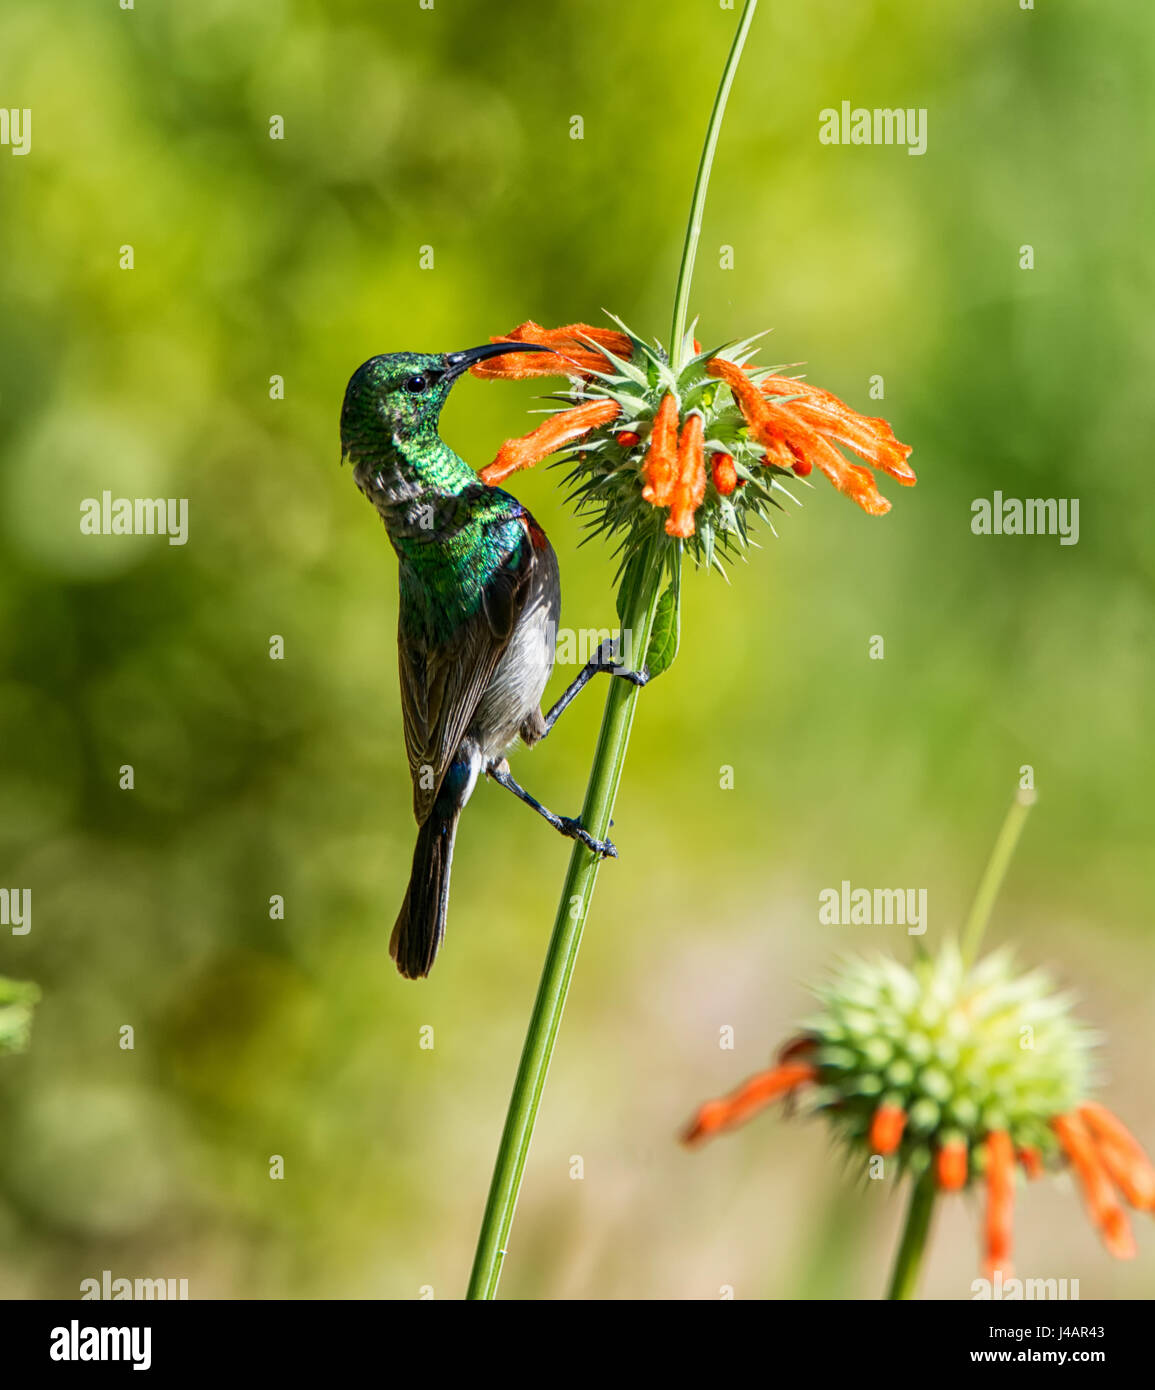 A Double-collared Sunbird perched on a WIld Dagga plant in Southern African savanna Stock Photo